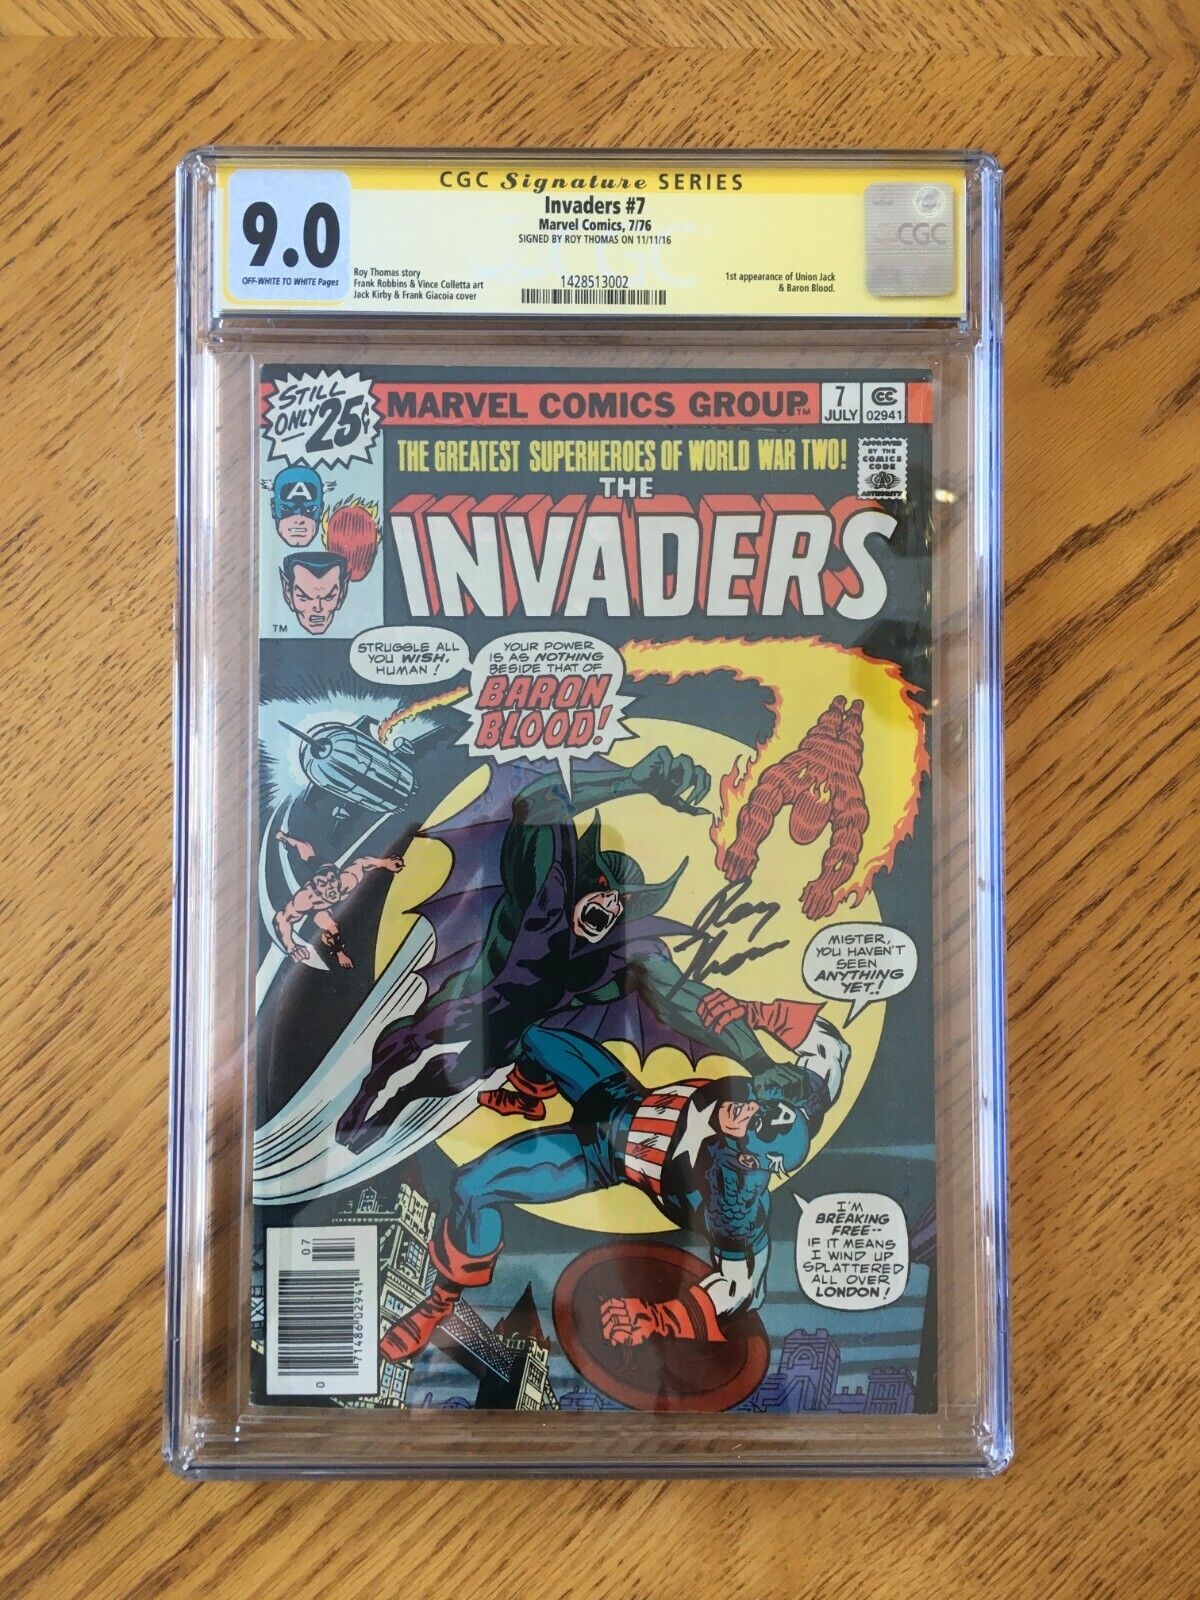 Invaders #7 Signed by Roy Thomas. 1st Union Jack & Baron Blood. 9.0 VF/NM CGC